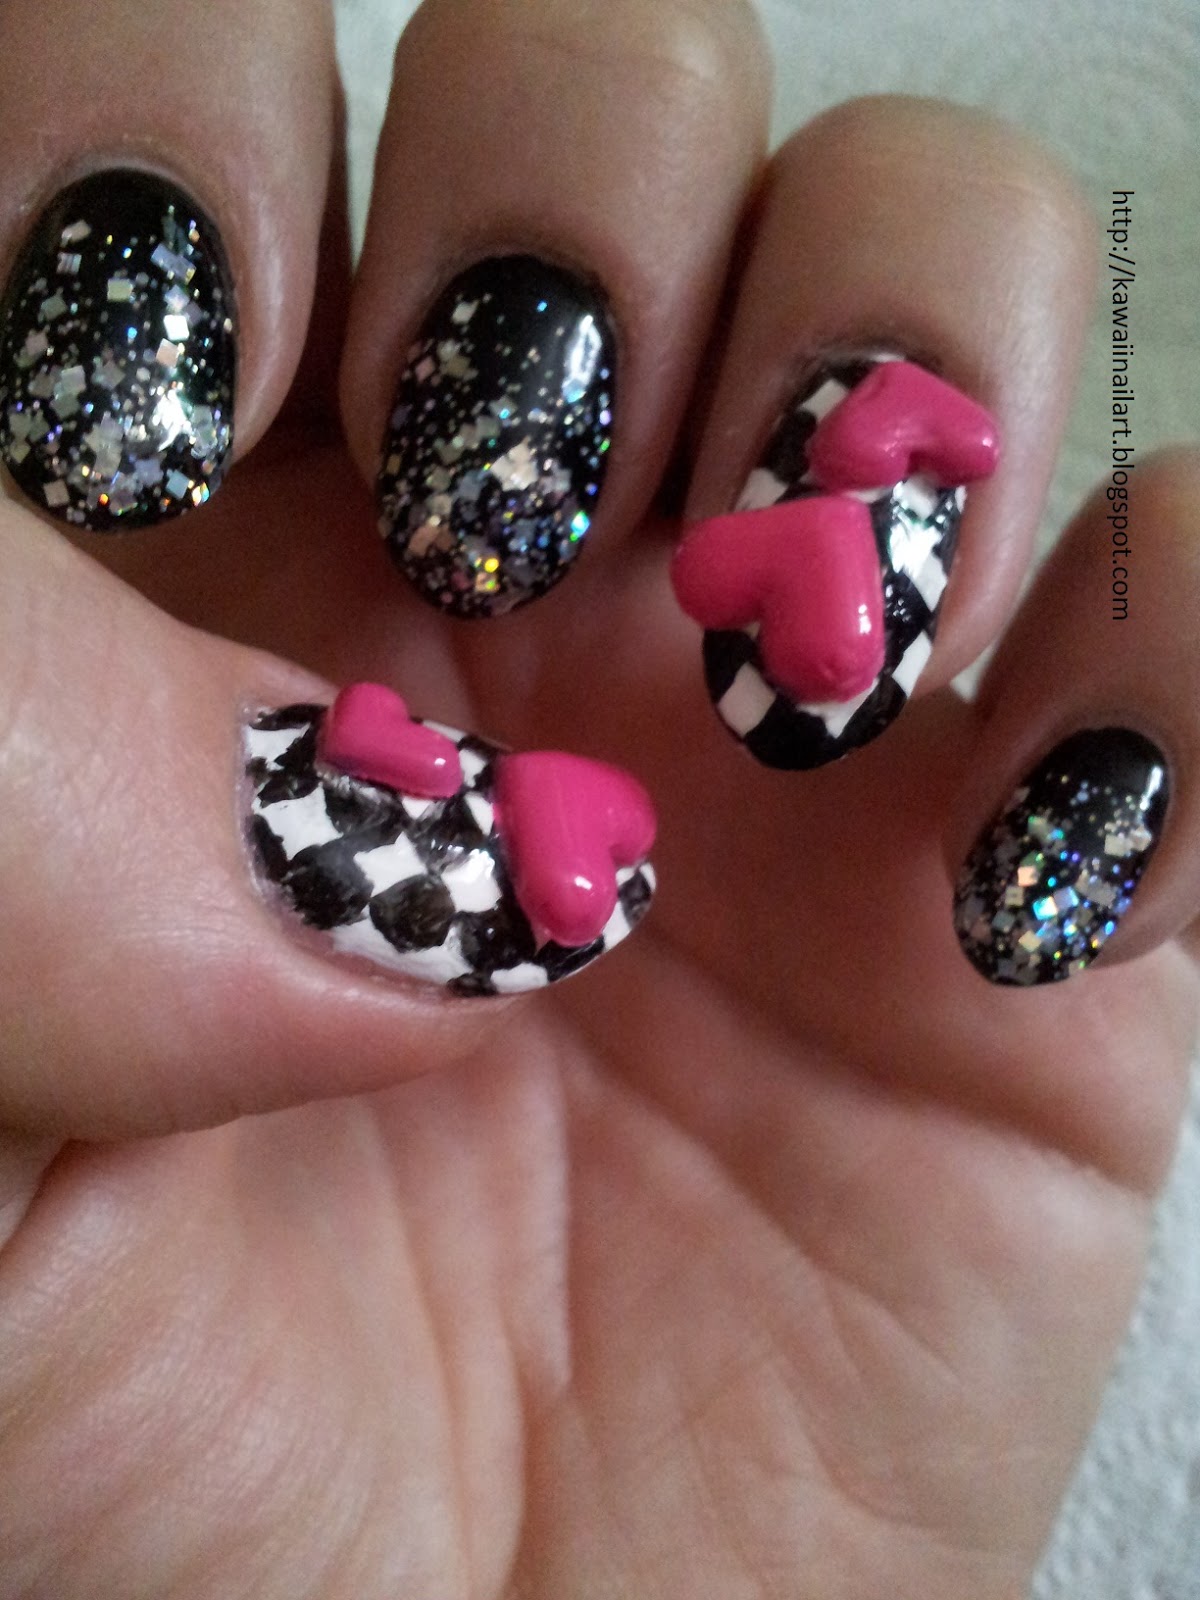 3d+nail+art+pink+hearts+black+and+white+chequer+board+nail+technician